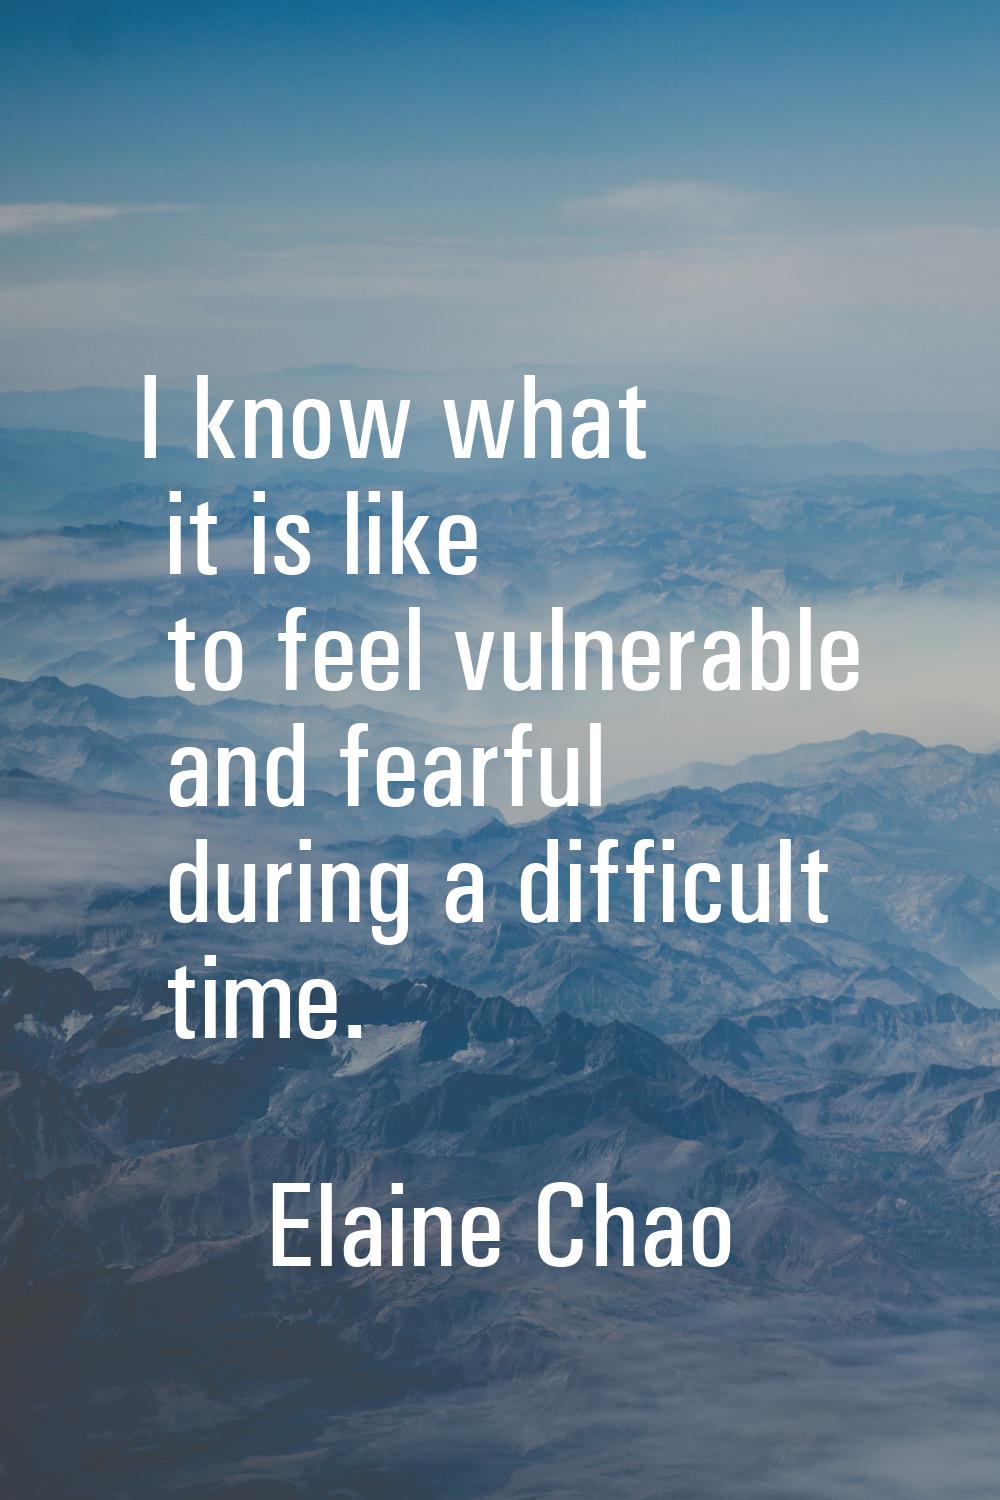 I know what it is like to feel vulnerable and fearful during a difficult time.